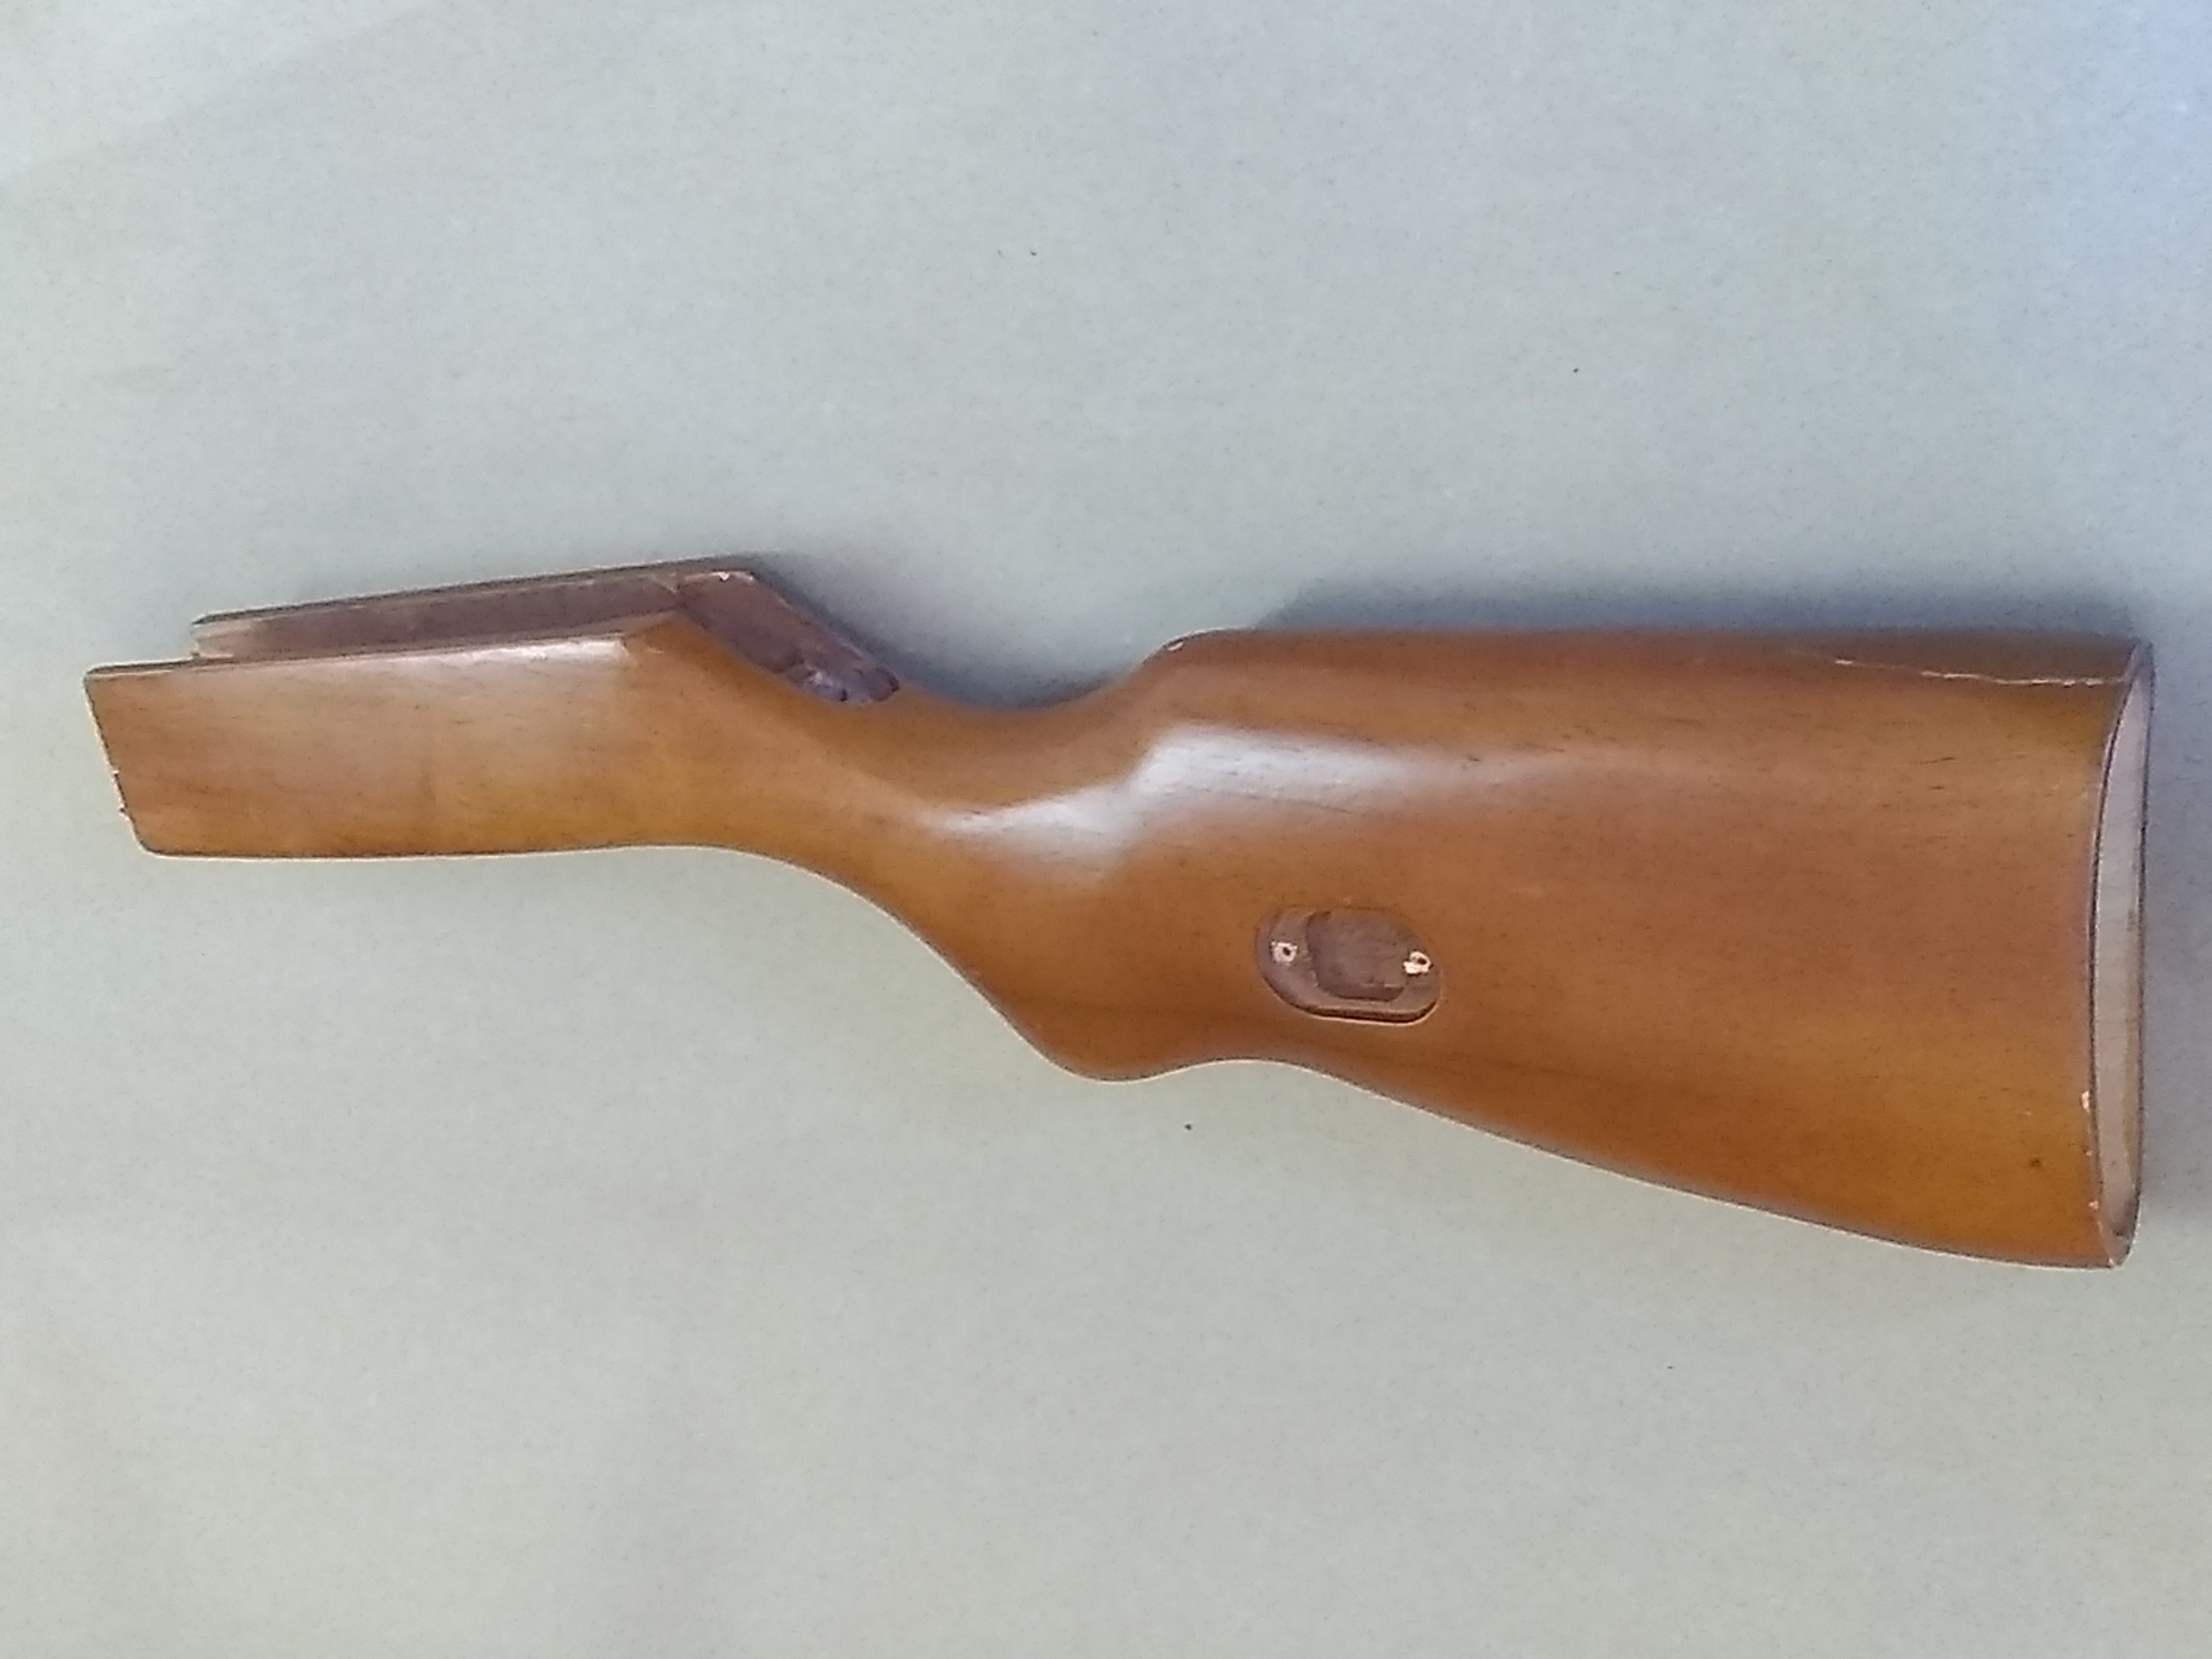 Stock for 6mmProShop / S&T PPSh-41 Airsoft AEG